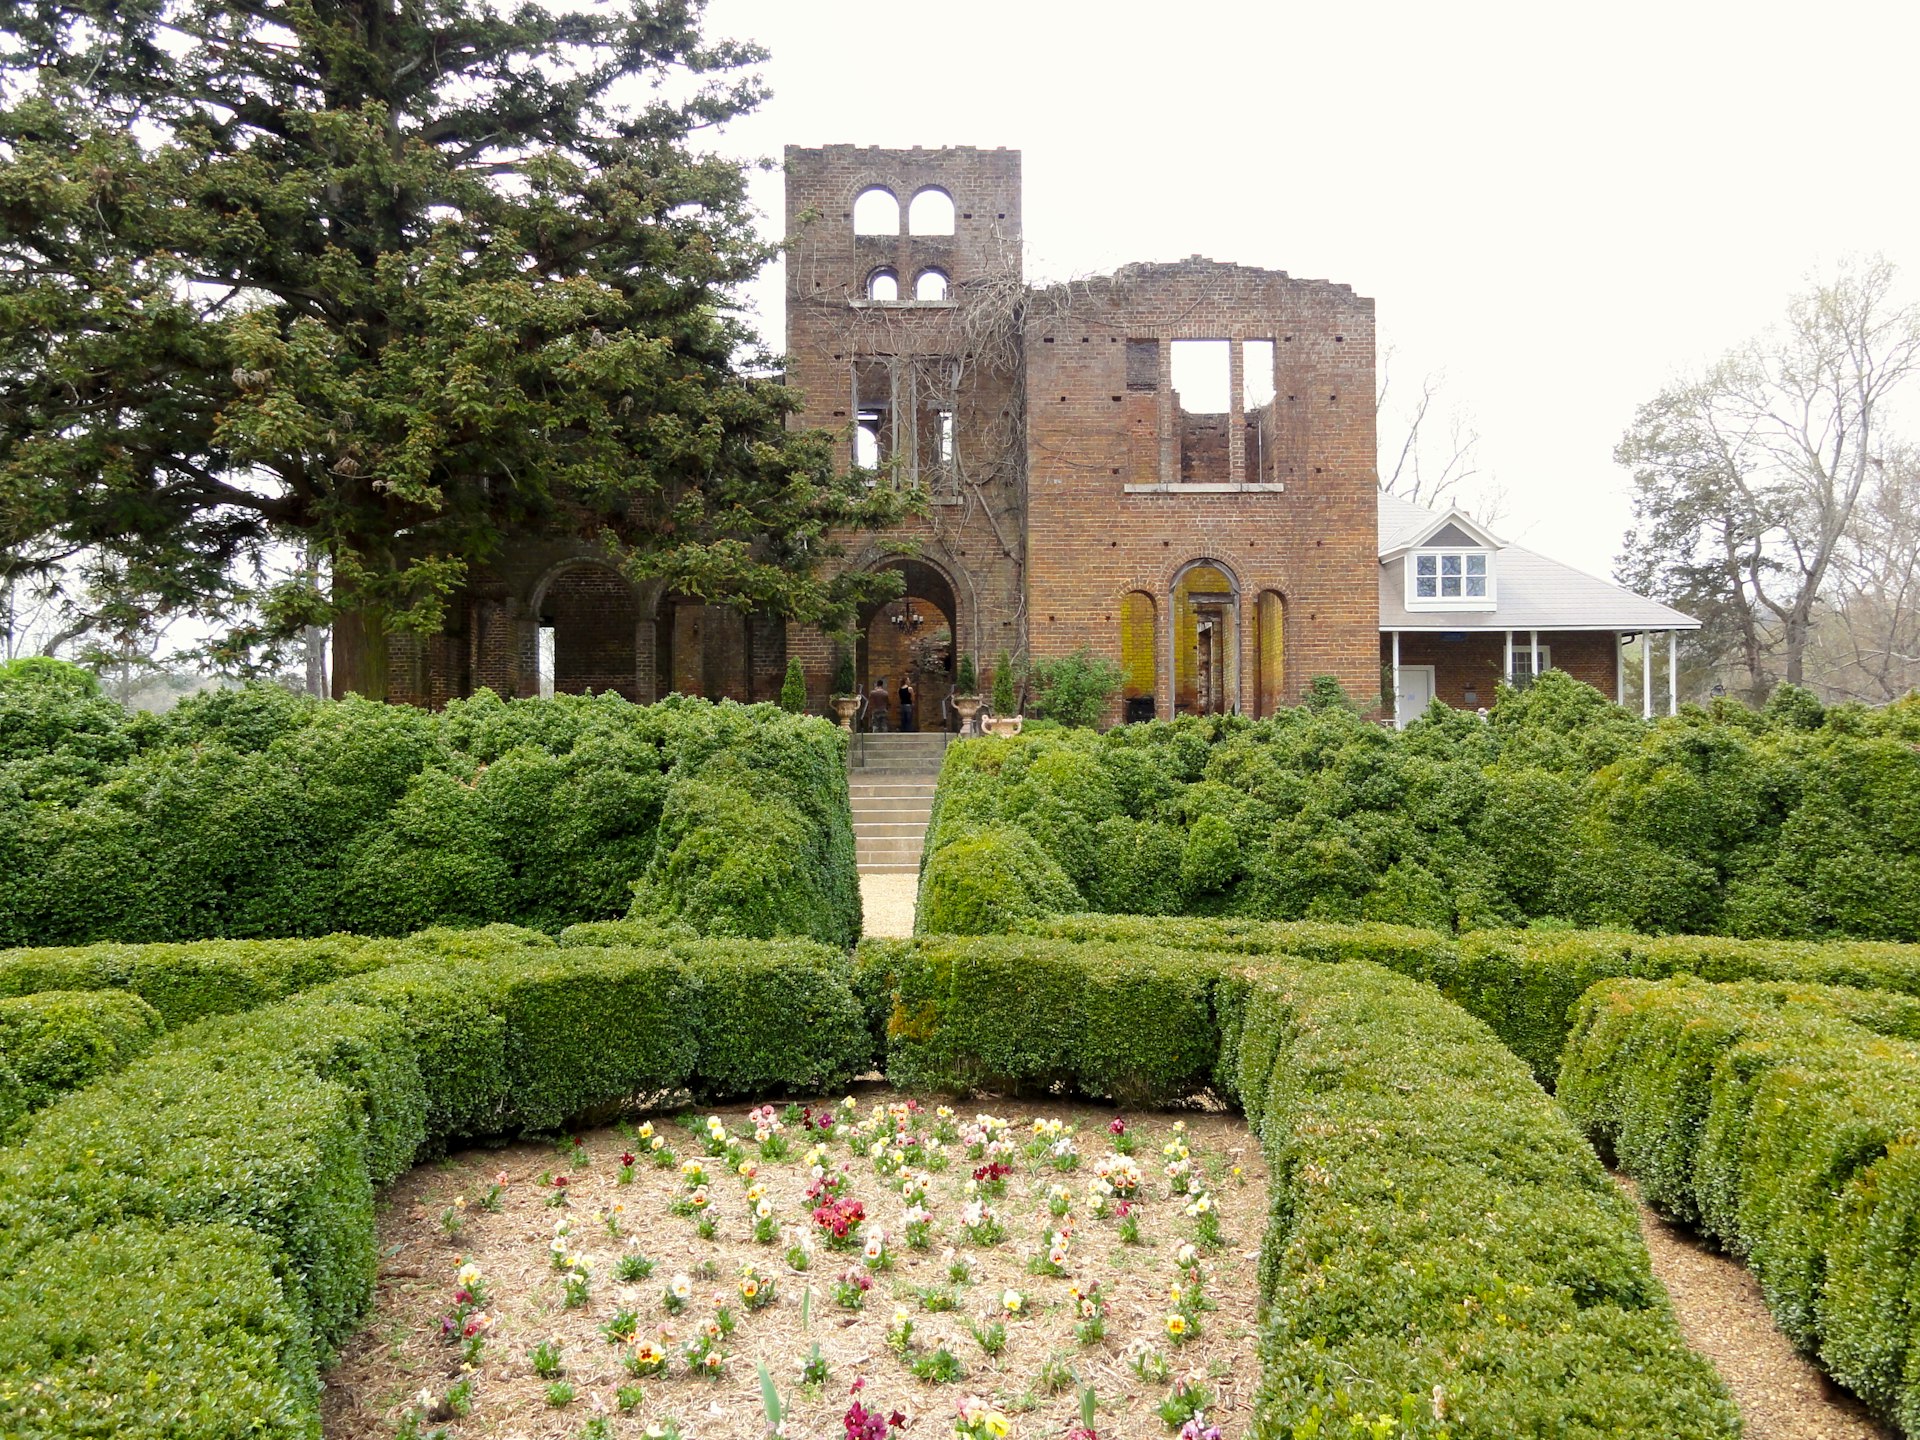 The brick ruins of an ornate Italianate villa overlooks trimmed hedges and flower gardens at this Adairsville agritourism destination